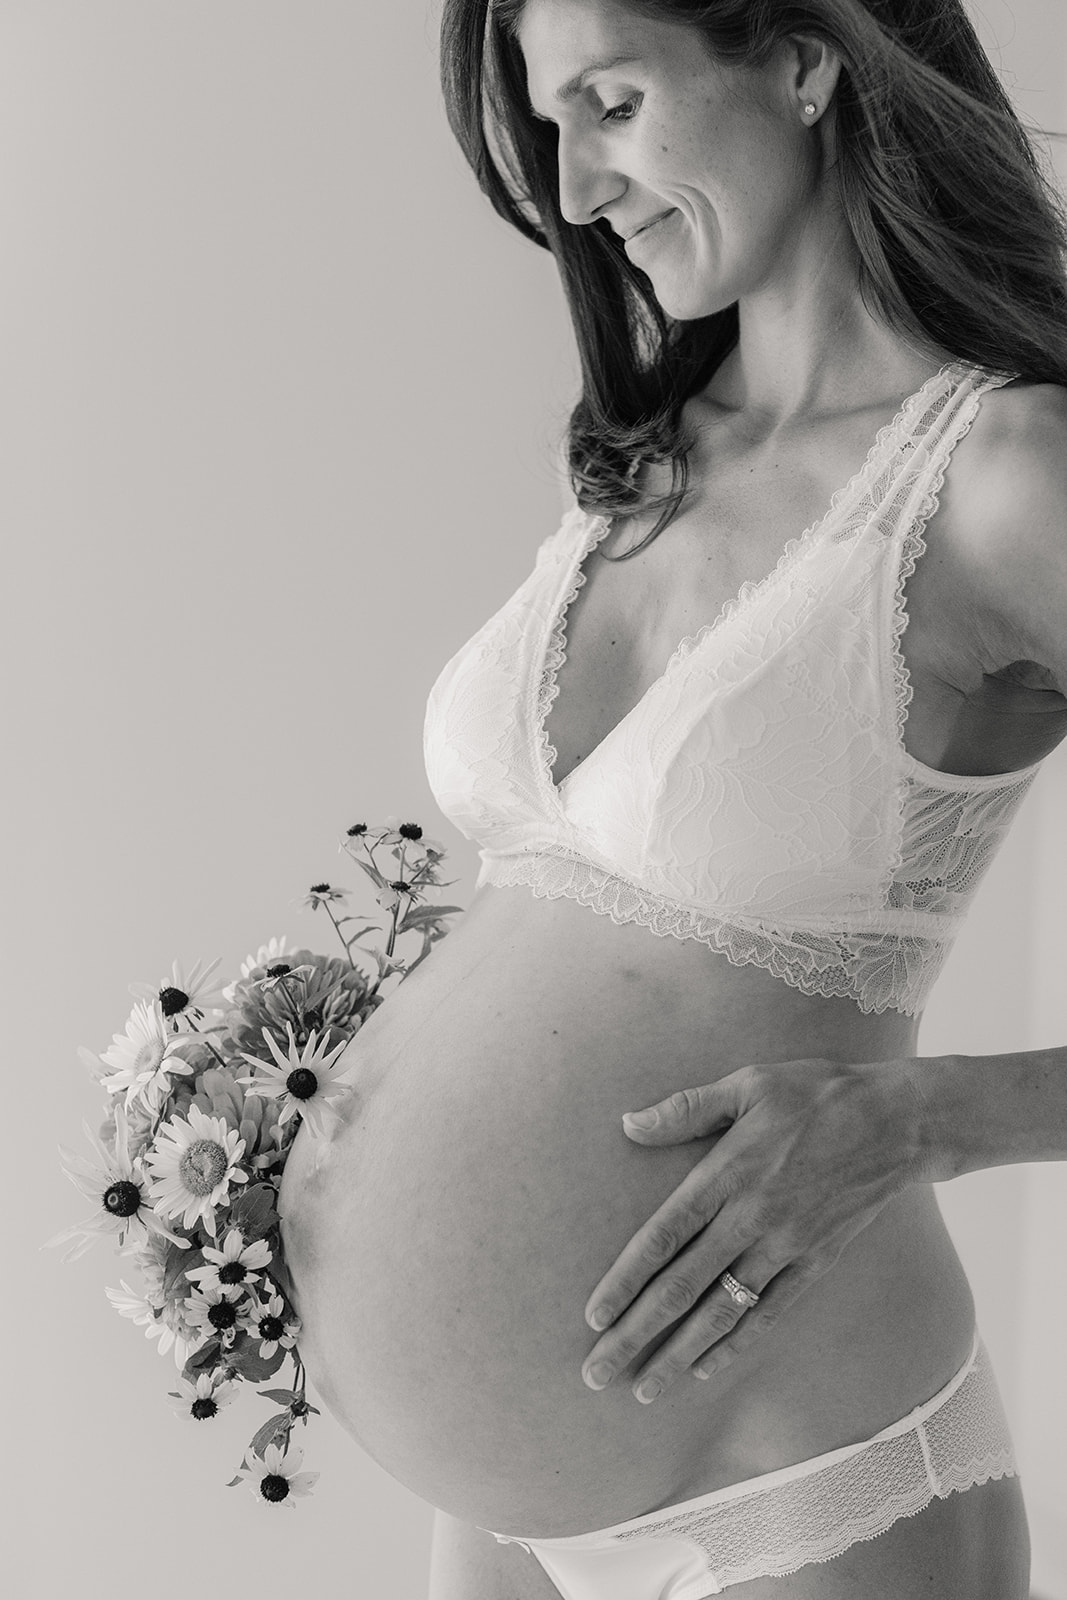 body empowerment and maternity session in nashville studio